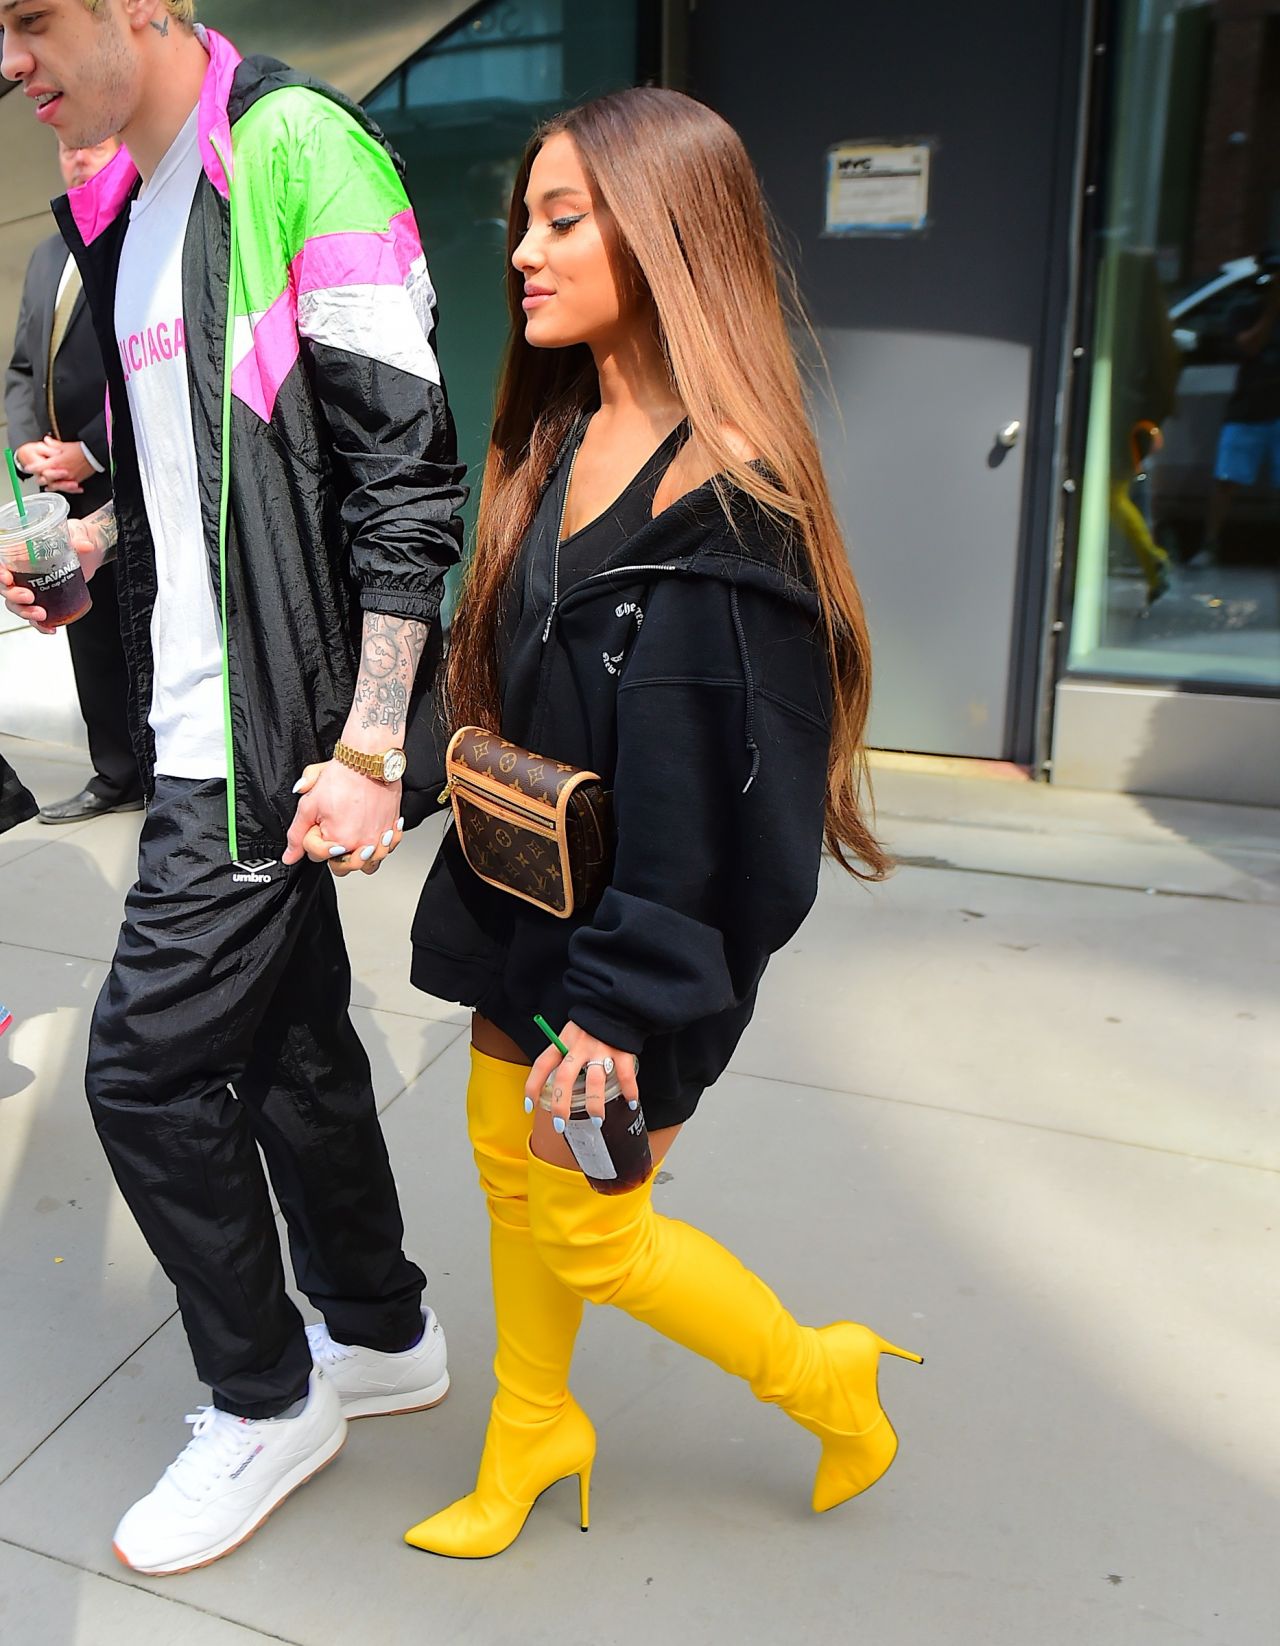 Ariana Grande With Pete Davidson June 20, 2018 – Star Style